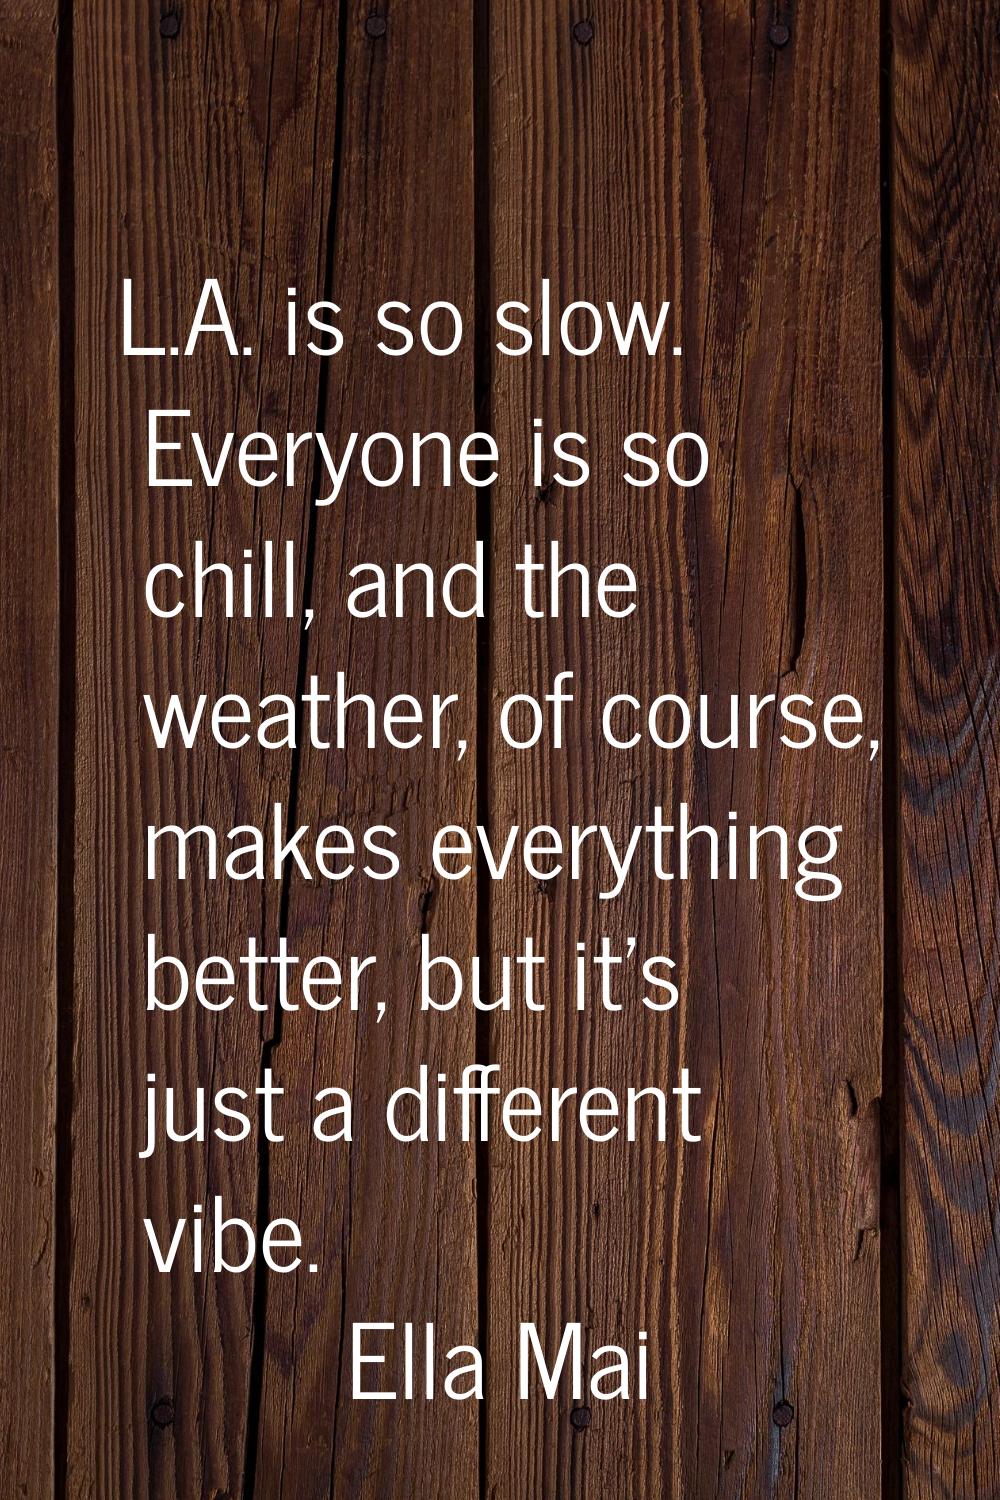 L.A. is so slow. Everyone is so chill, and the weather, of course, makes everything better, but it'